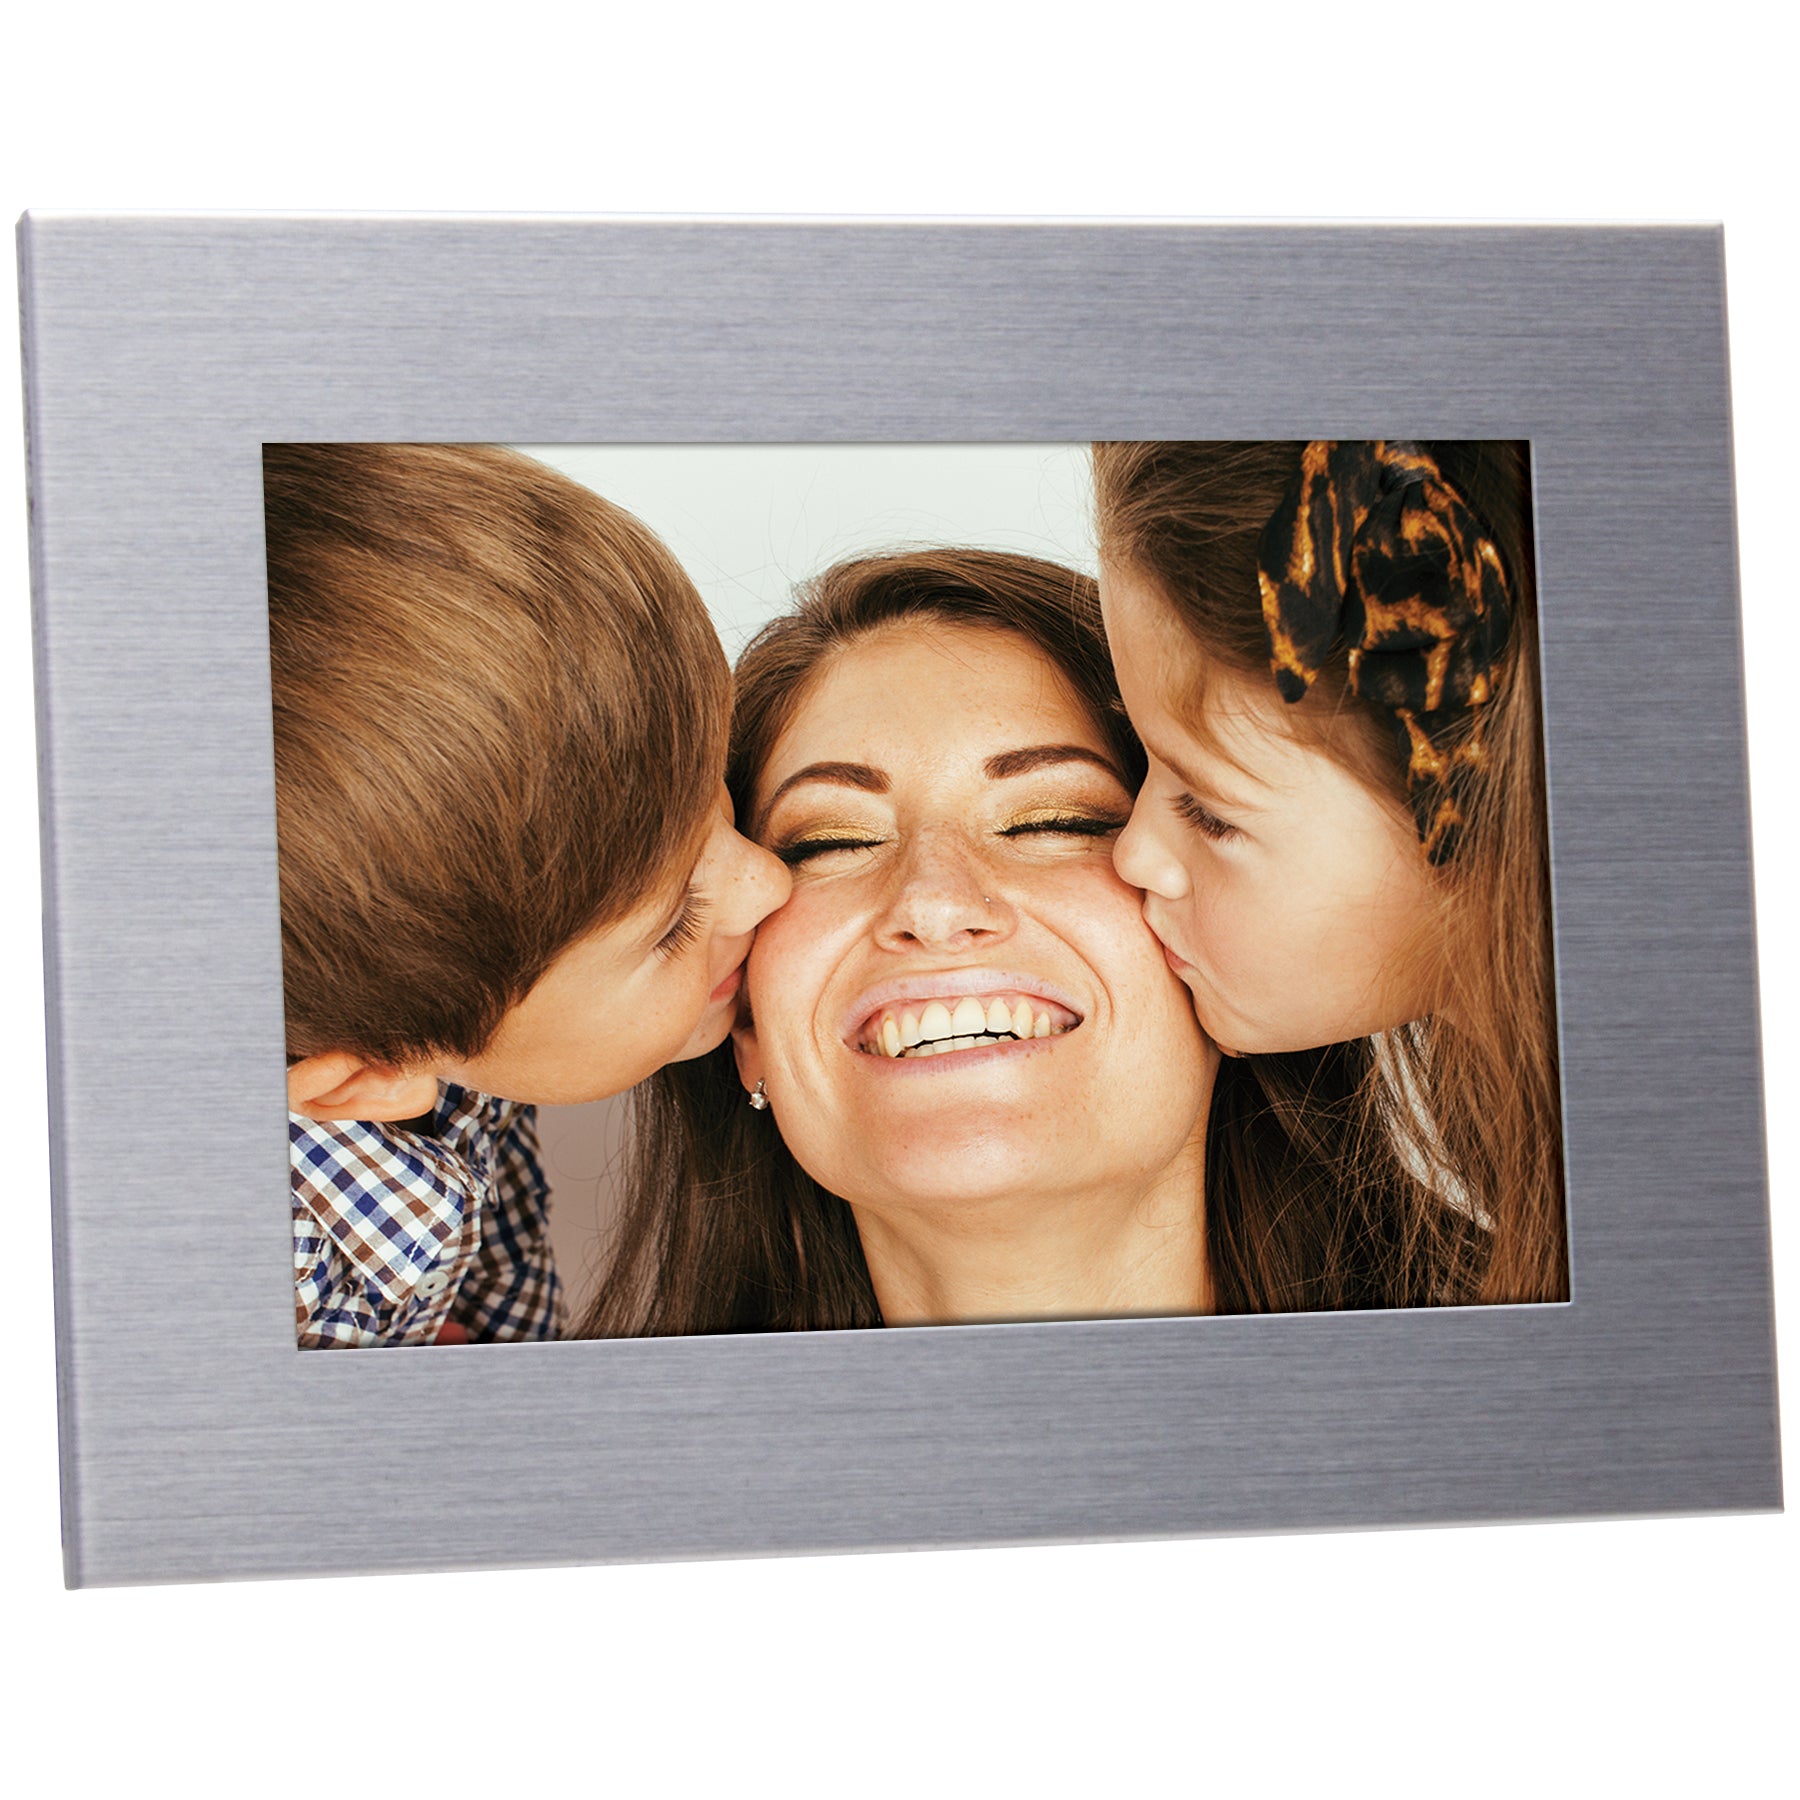 2-3/8” x 3-1/2” Silver Picture Frame